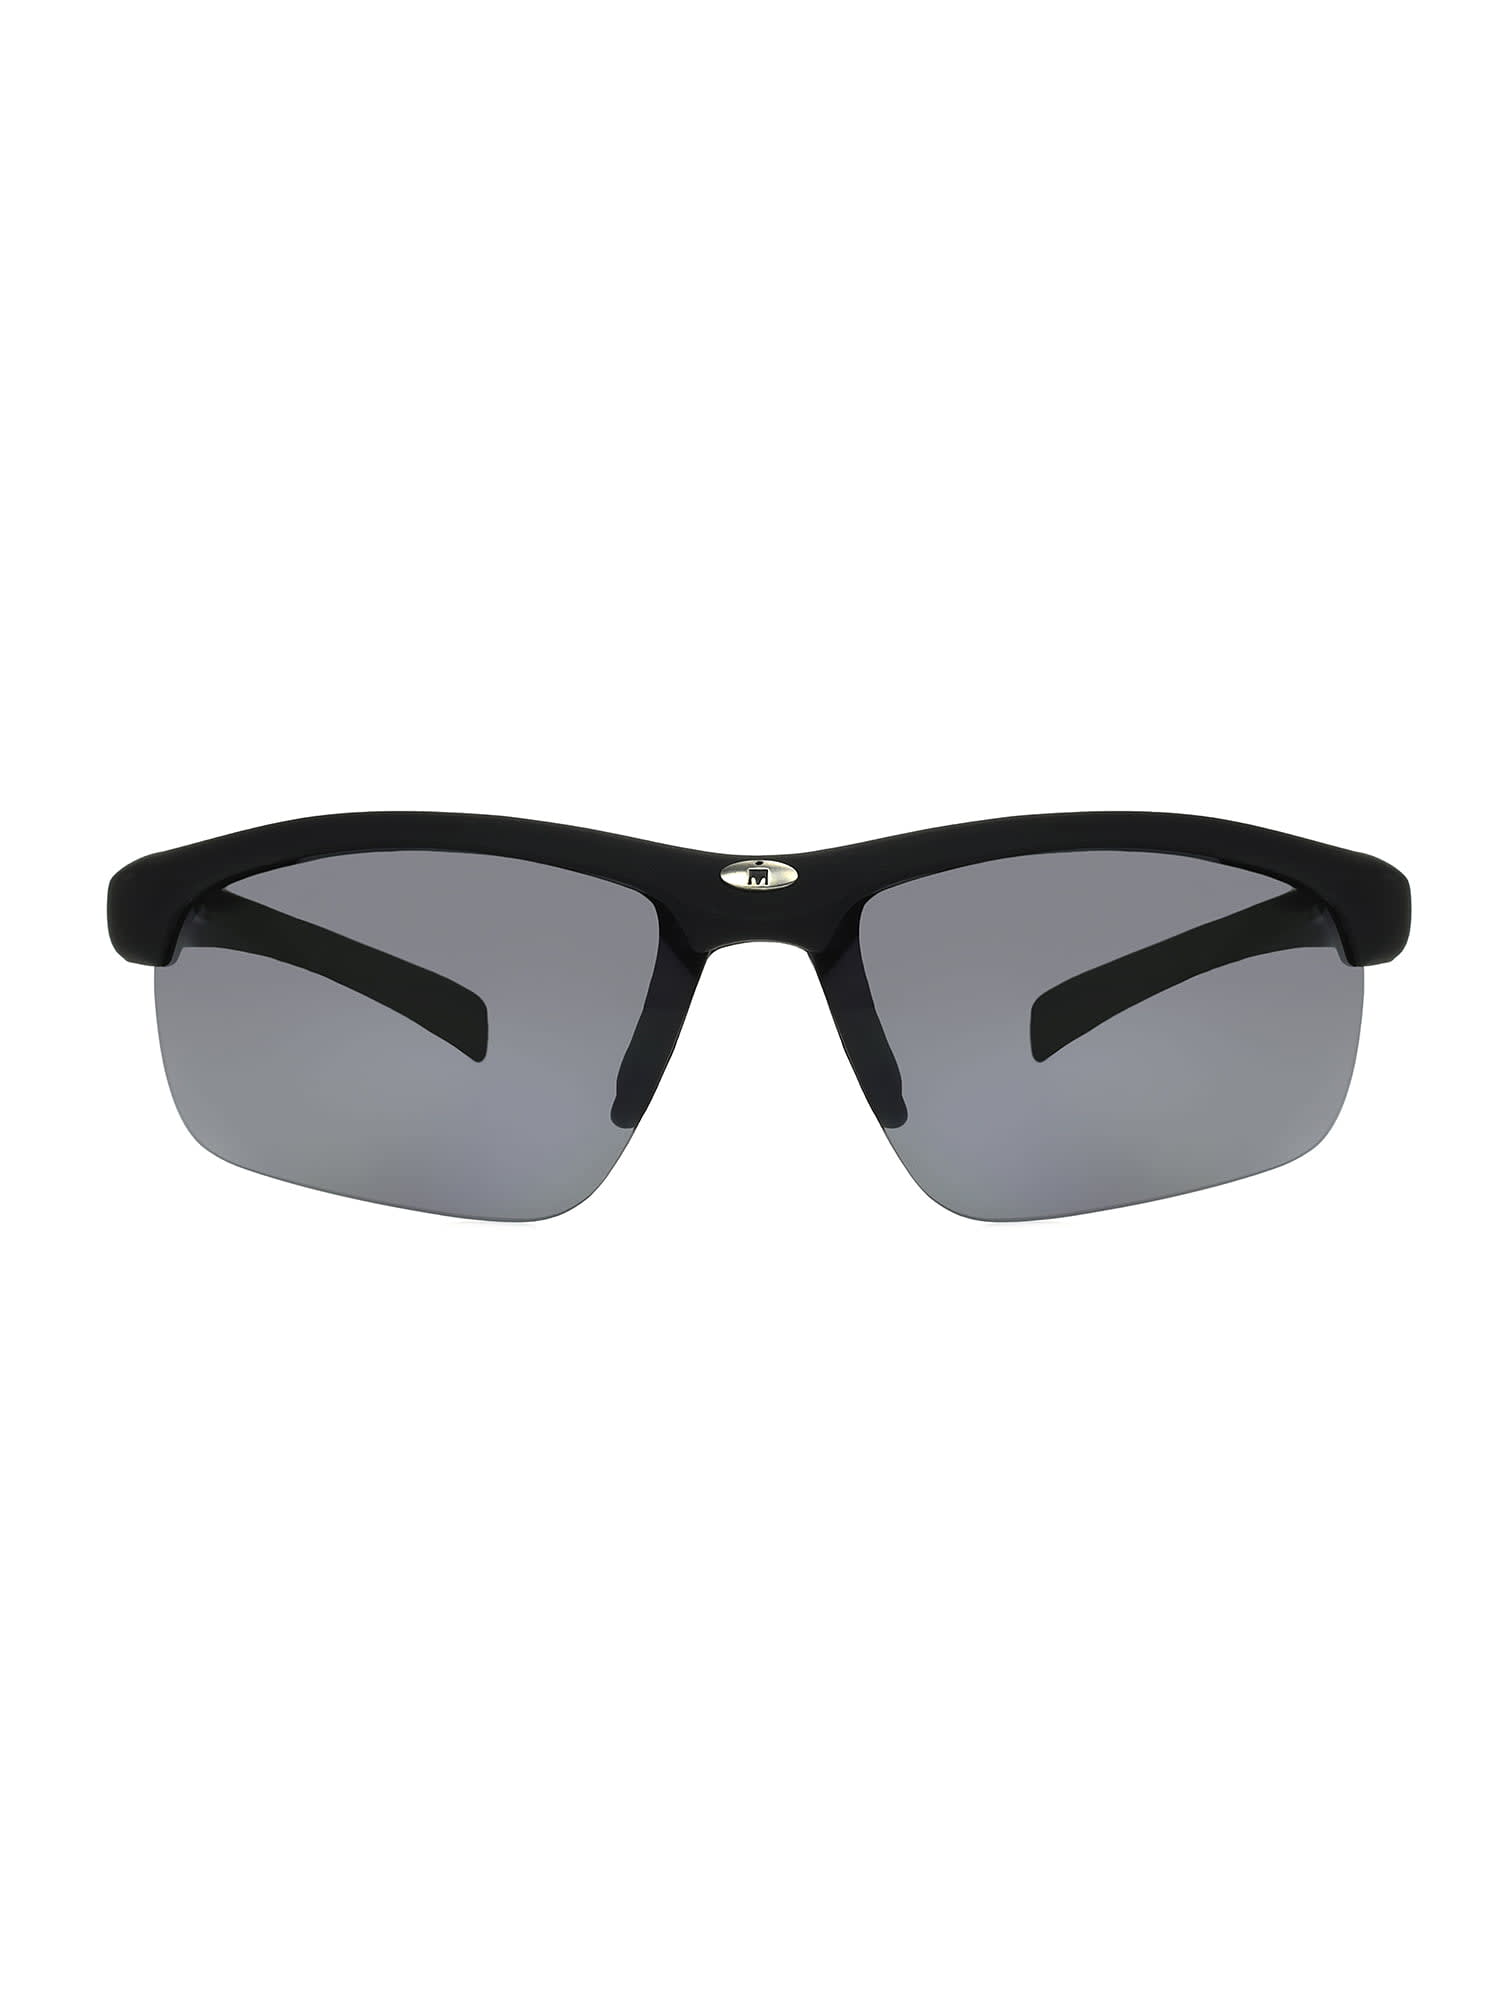 Ironman Men's Blade Black Sunglasses - DroneUp Delivery